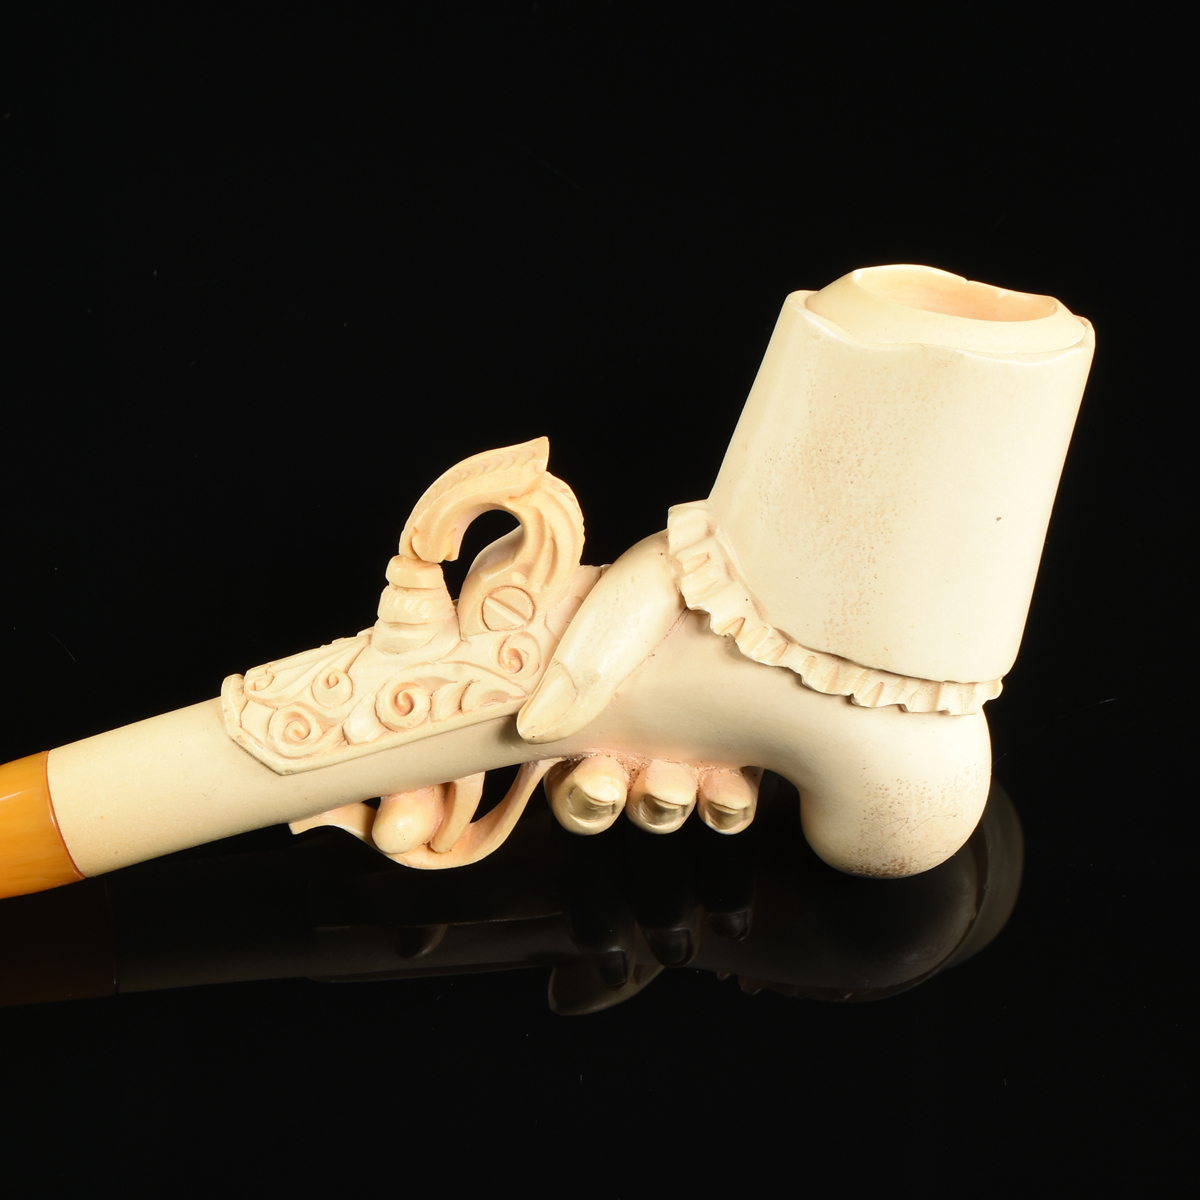 A GROUP OF THREE MEERSCHAUM TOBACCO PIPES, LATE 19TH/EARLY 20TH CENTURY, carved in the form of a - Image 3 of 9